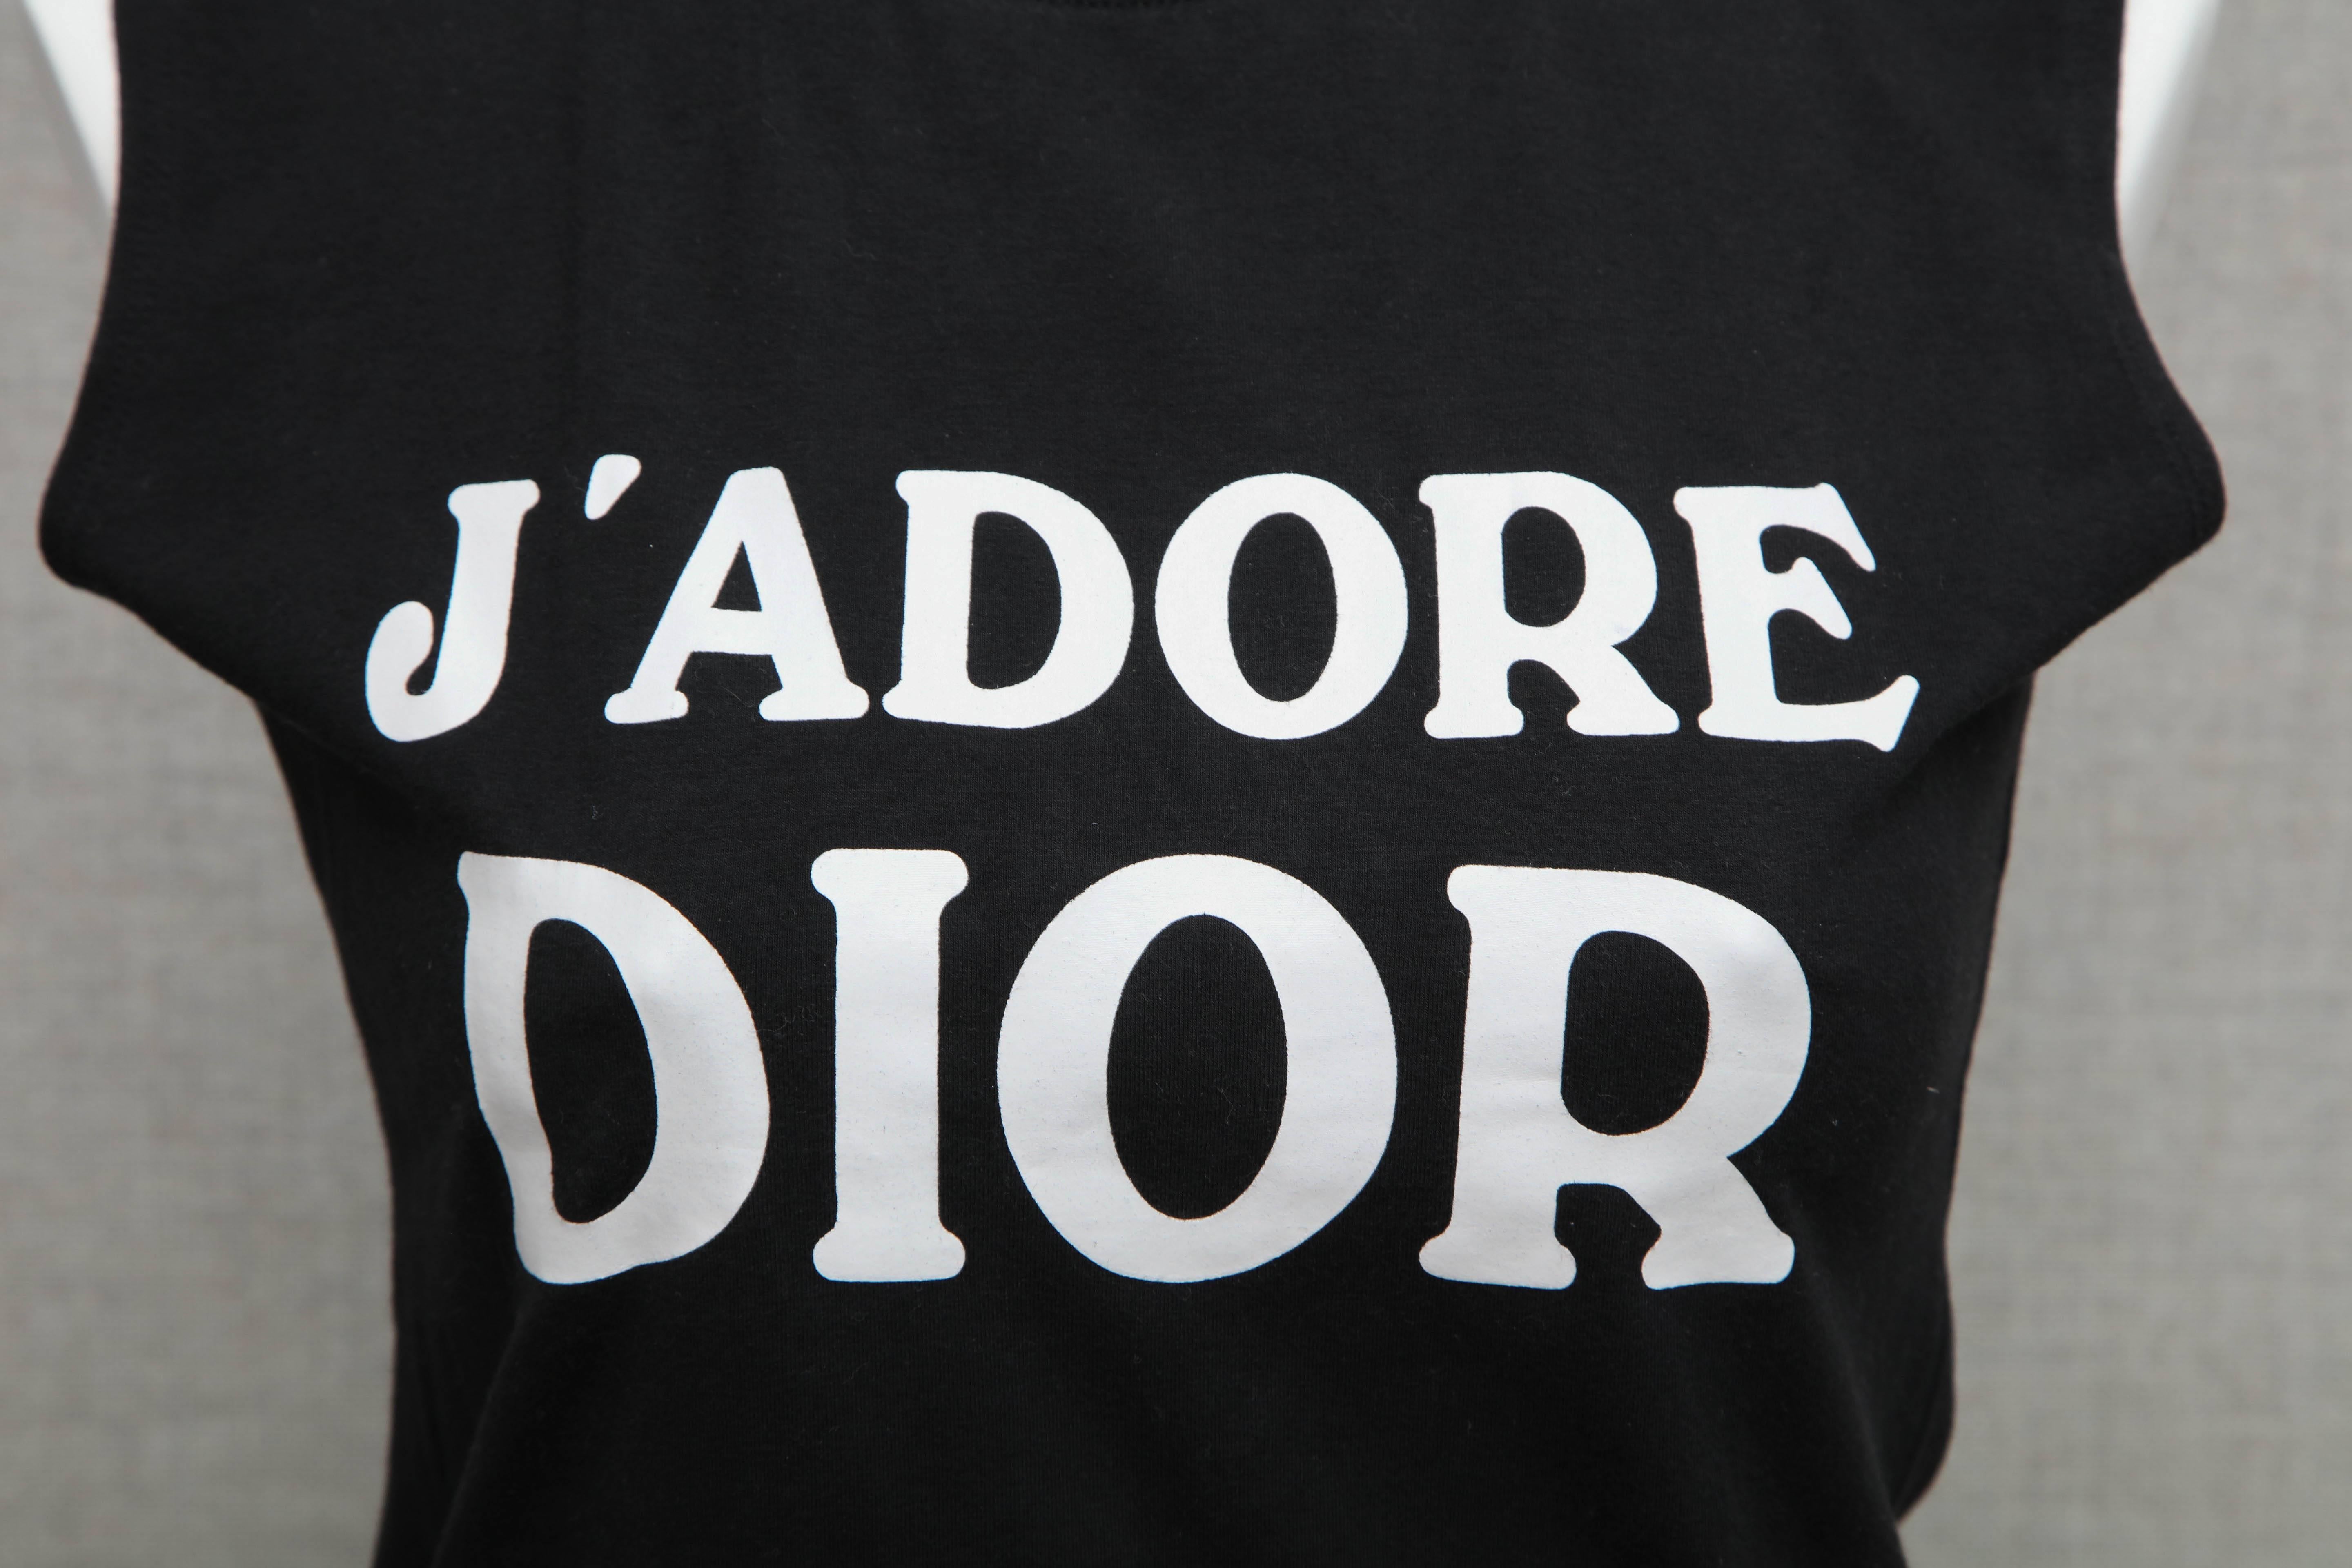 John Galliano for Christian Dior tank top with iconic J'ADORE DIOR logo.

French size 40